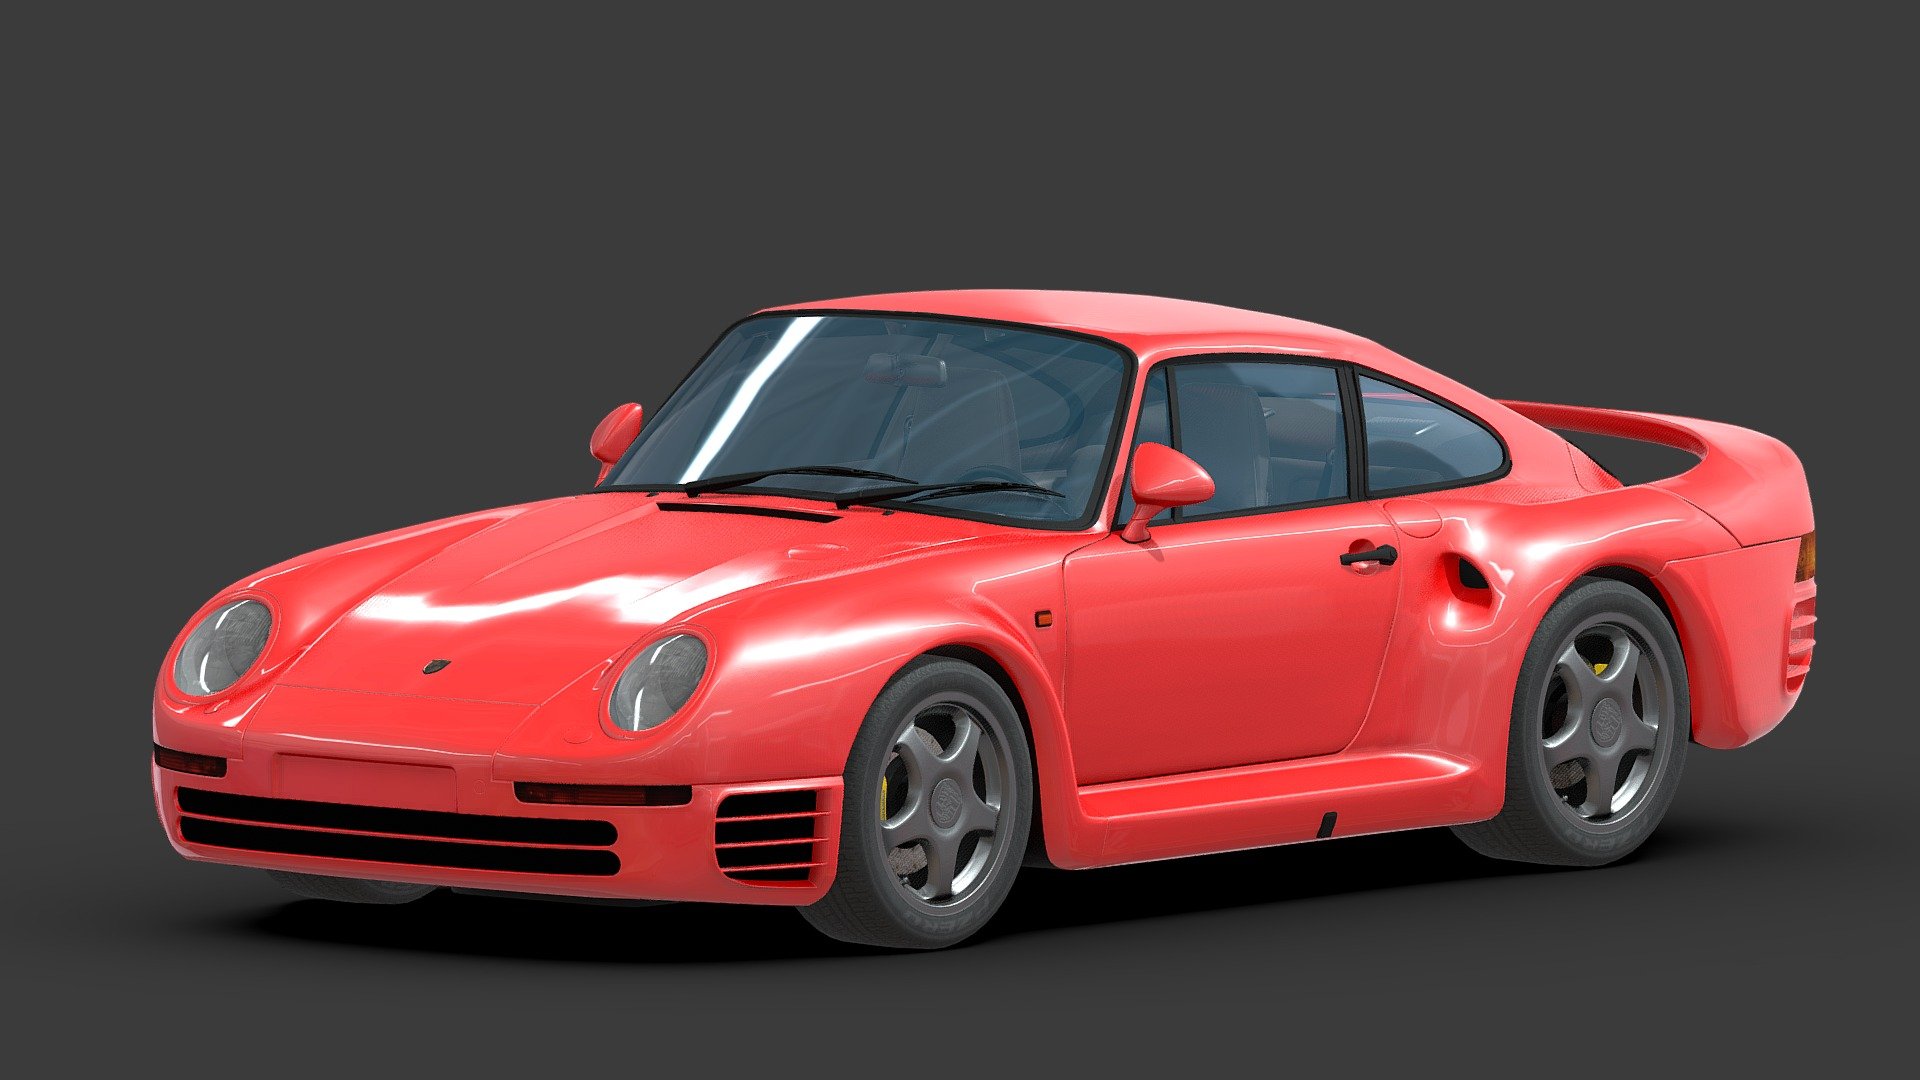 Porsche 959 modeled in fusion 360 and textured in substance painter, using freely avalible automotive materials - Porsche 959 - Download Free 3D model by Alexios Apokaukos (@Alexios_Apokaukos) 3d model